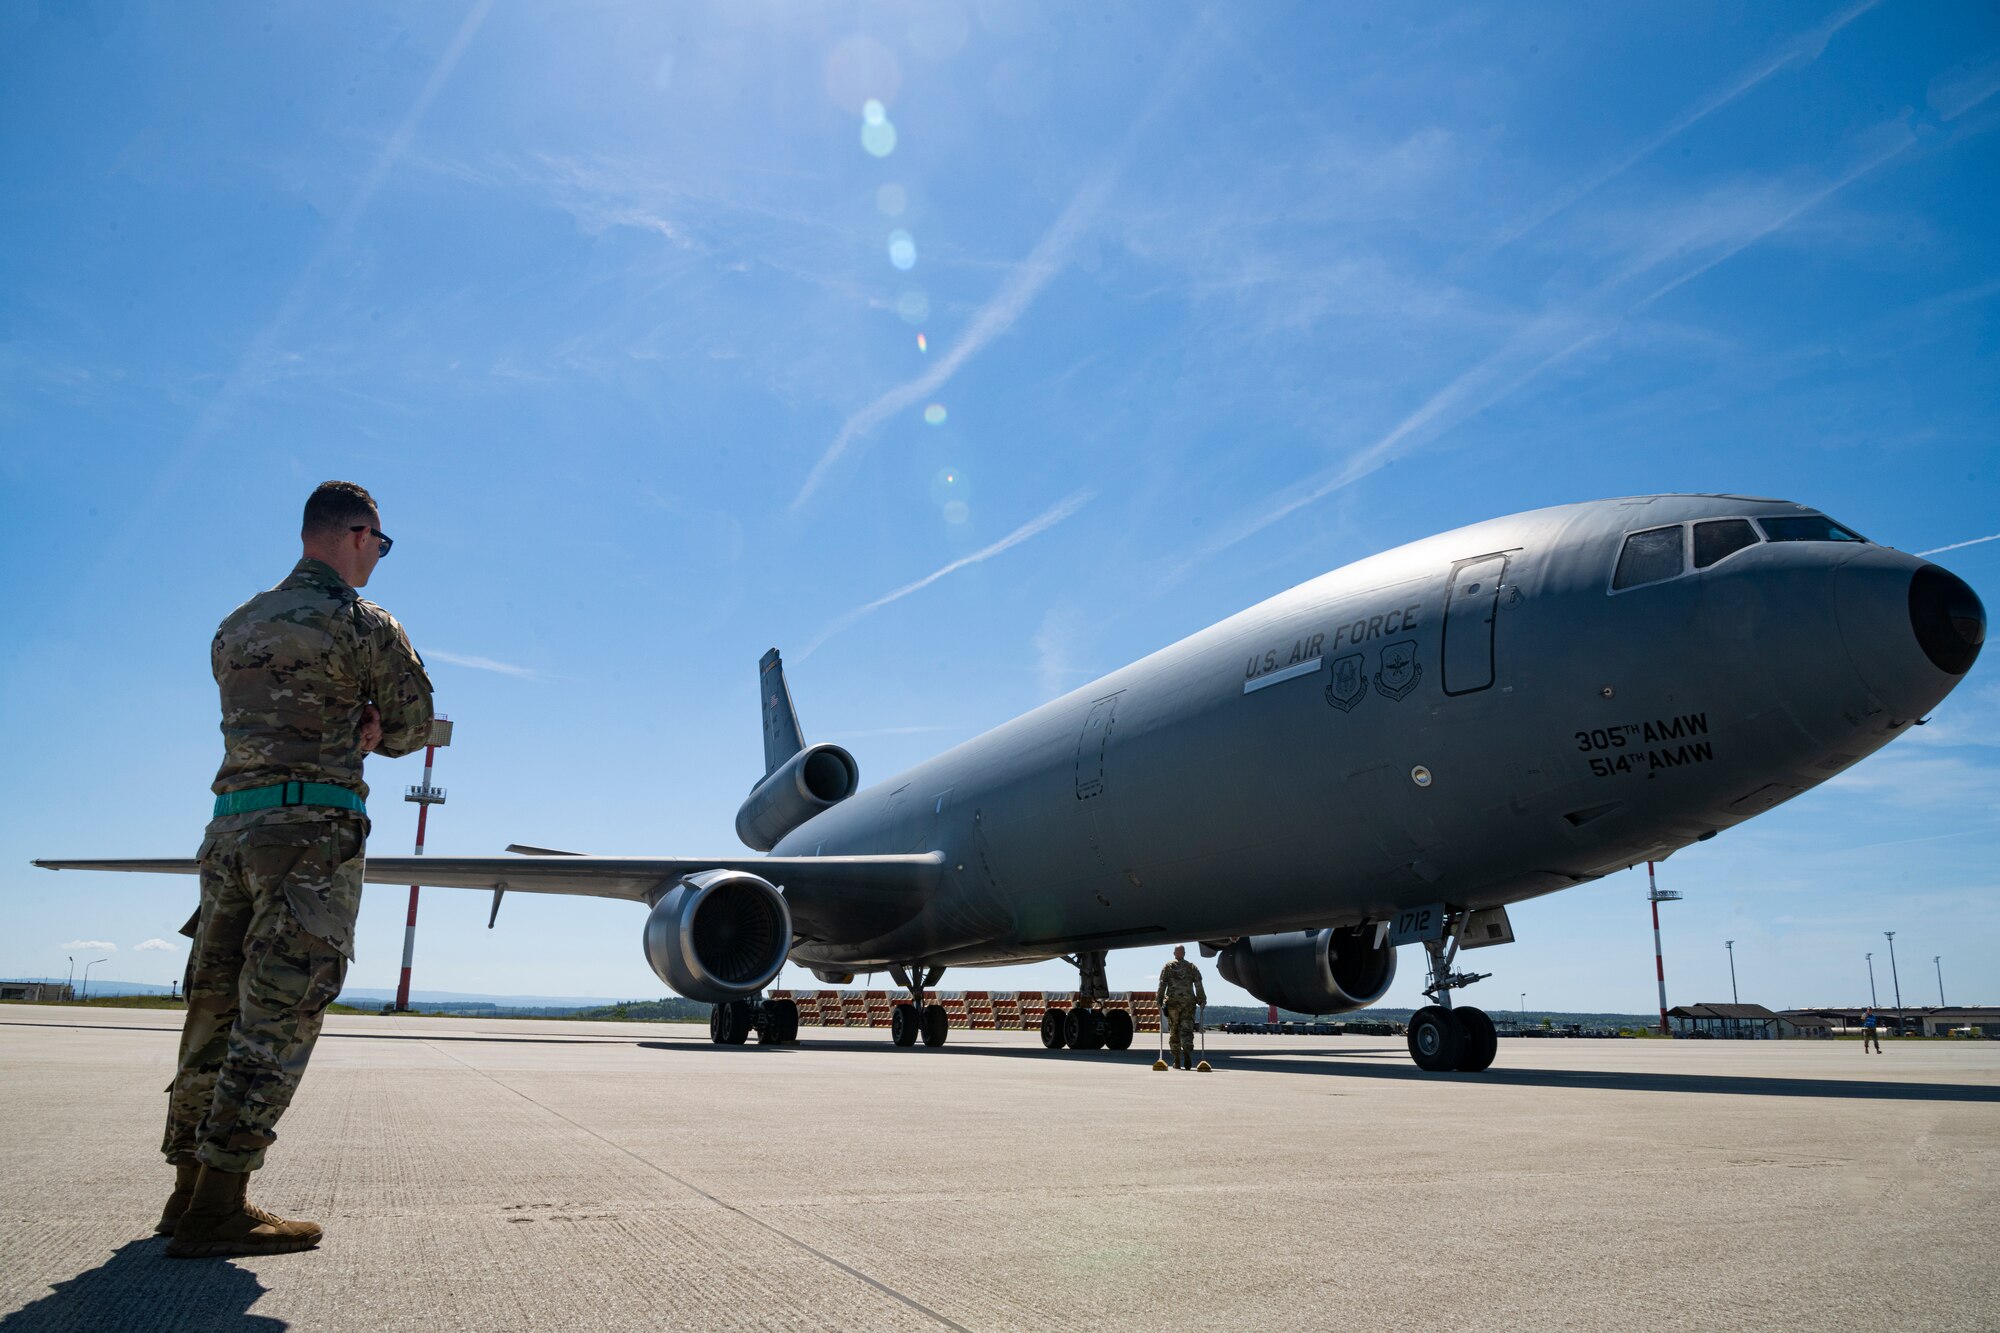 An Airman from the 726th Air Mobility Squadron at Spangdahlem Air Base, Germany, observes a KC-10 Extender aircraft assigned to the 305th Air Mobility Wing at Joint Base McGuire-Dix-Lakehurst, New Jersey, after it arrived at Spangdahlem AB, May 14, 2022. Movements such as these are designed to respond to the current security environment and reinforce the deterrent and defensive posture on NATO’s eastern flank. (U.S. Air Force photo by Senior Airman Ali Stewart)